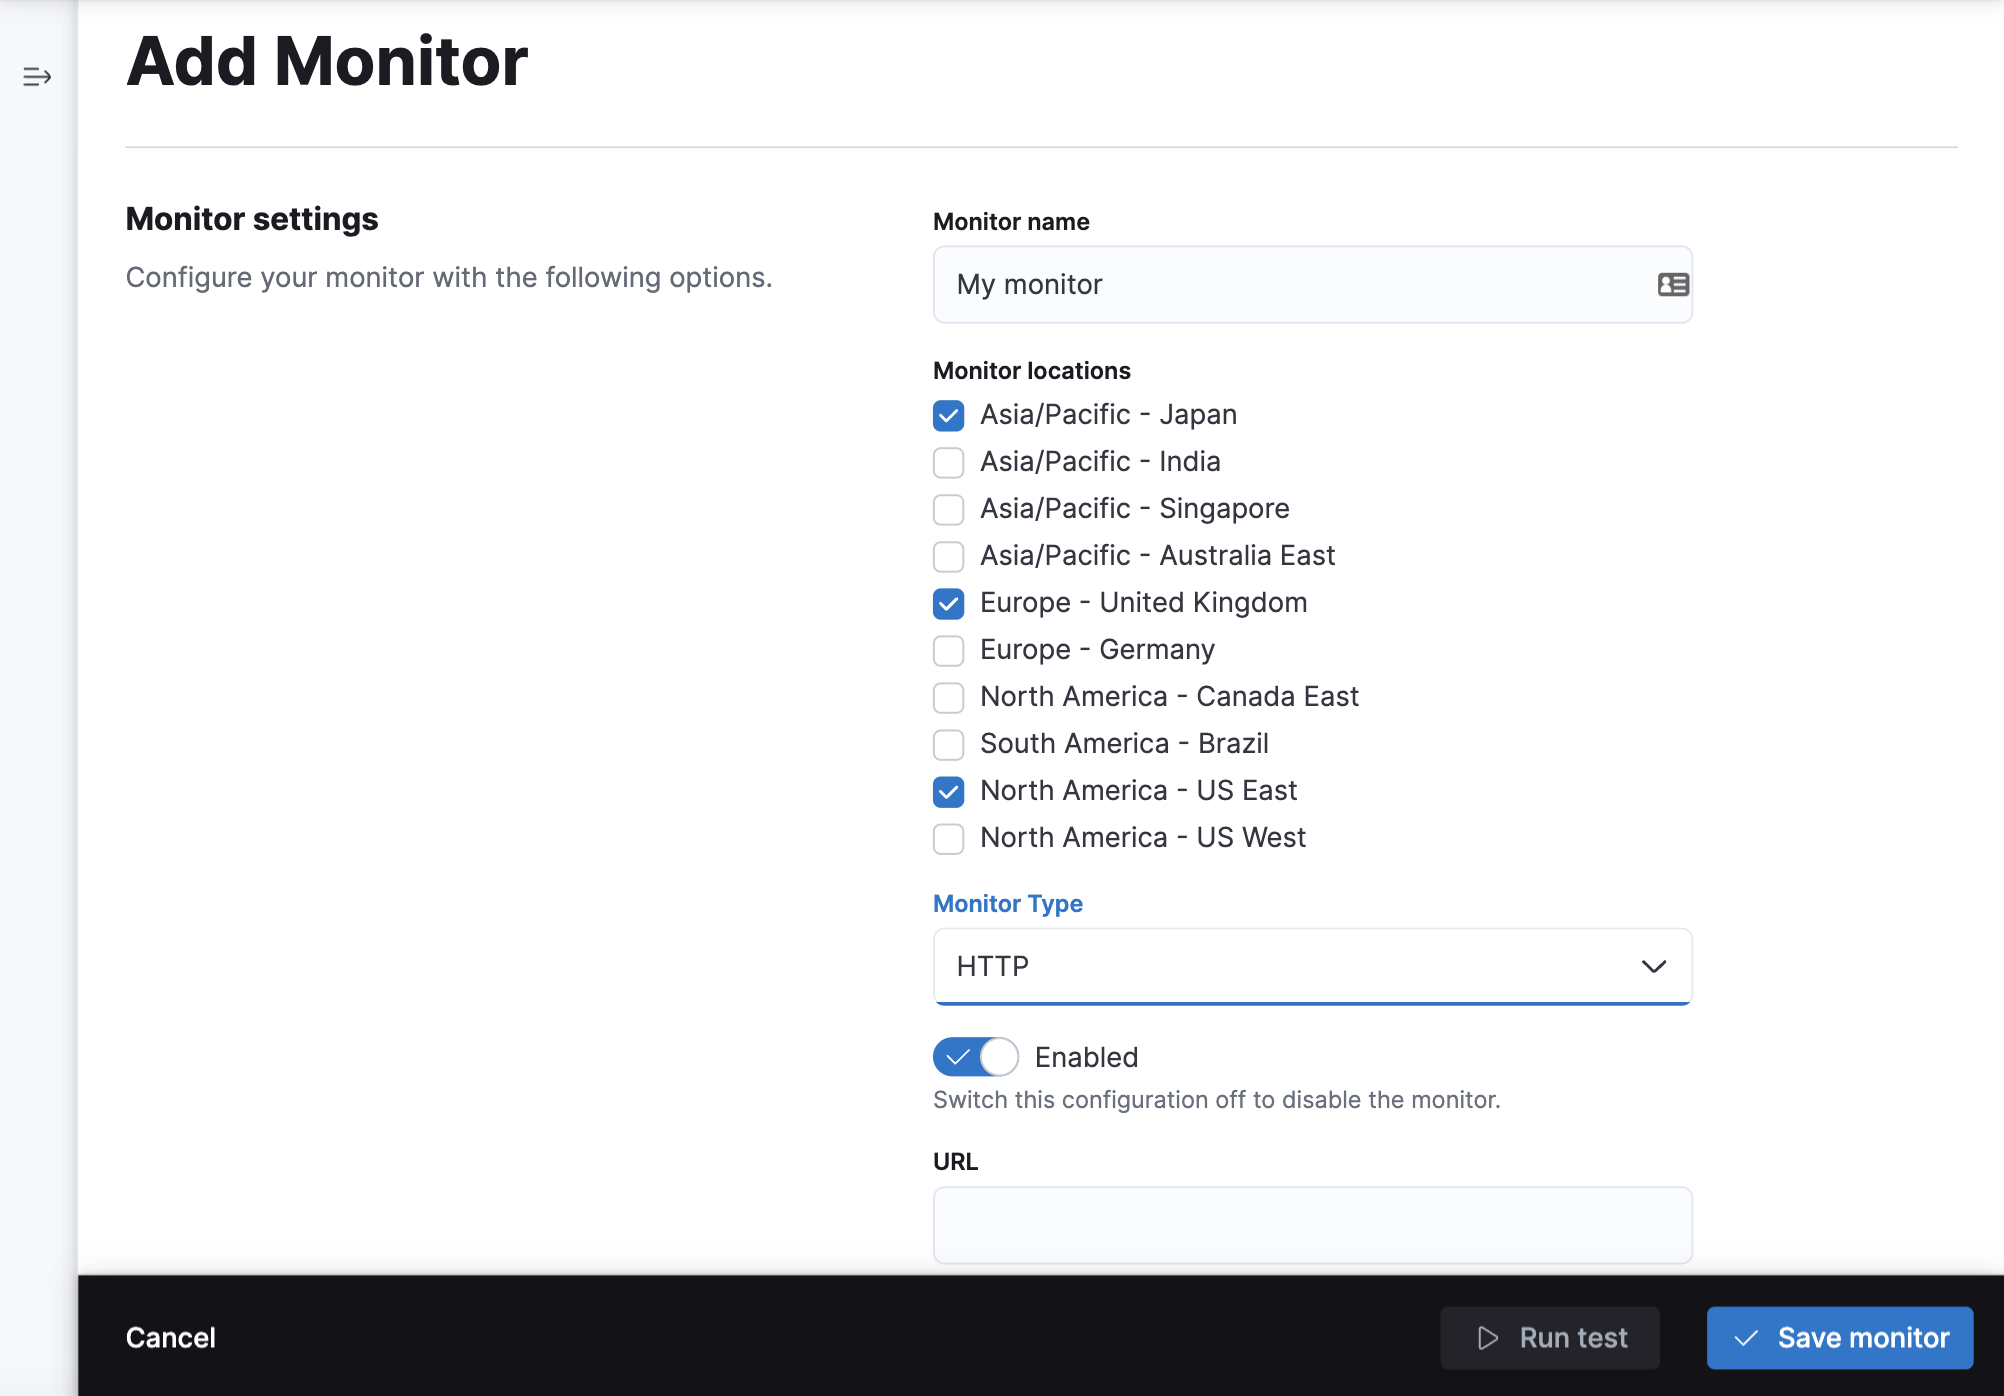 Add monitor UI in Kibana in the Uptime App’s Monitor Management